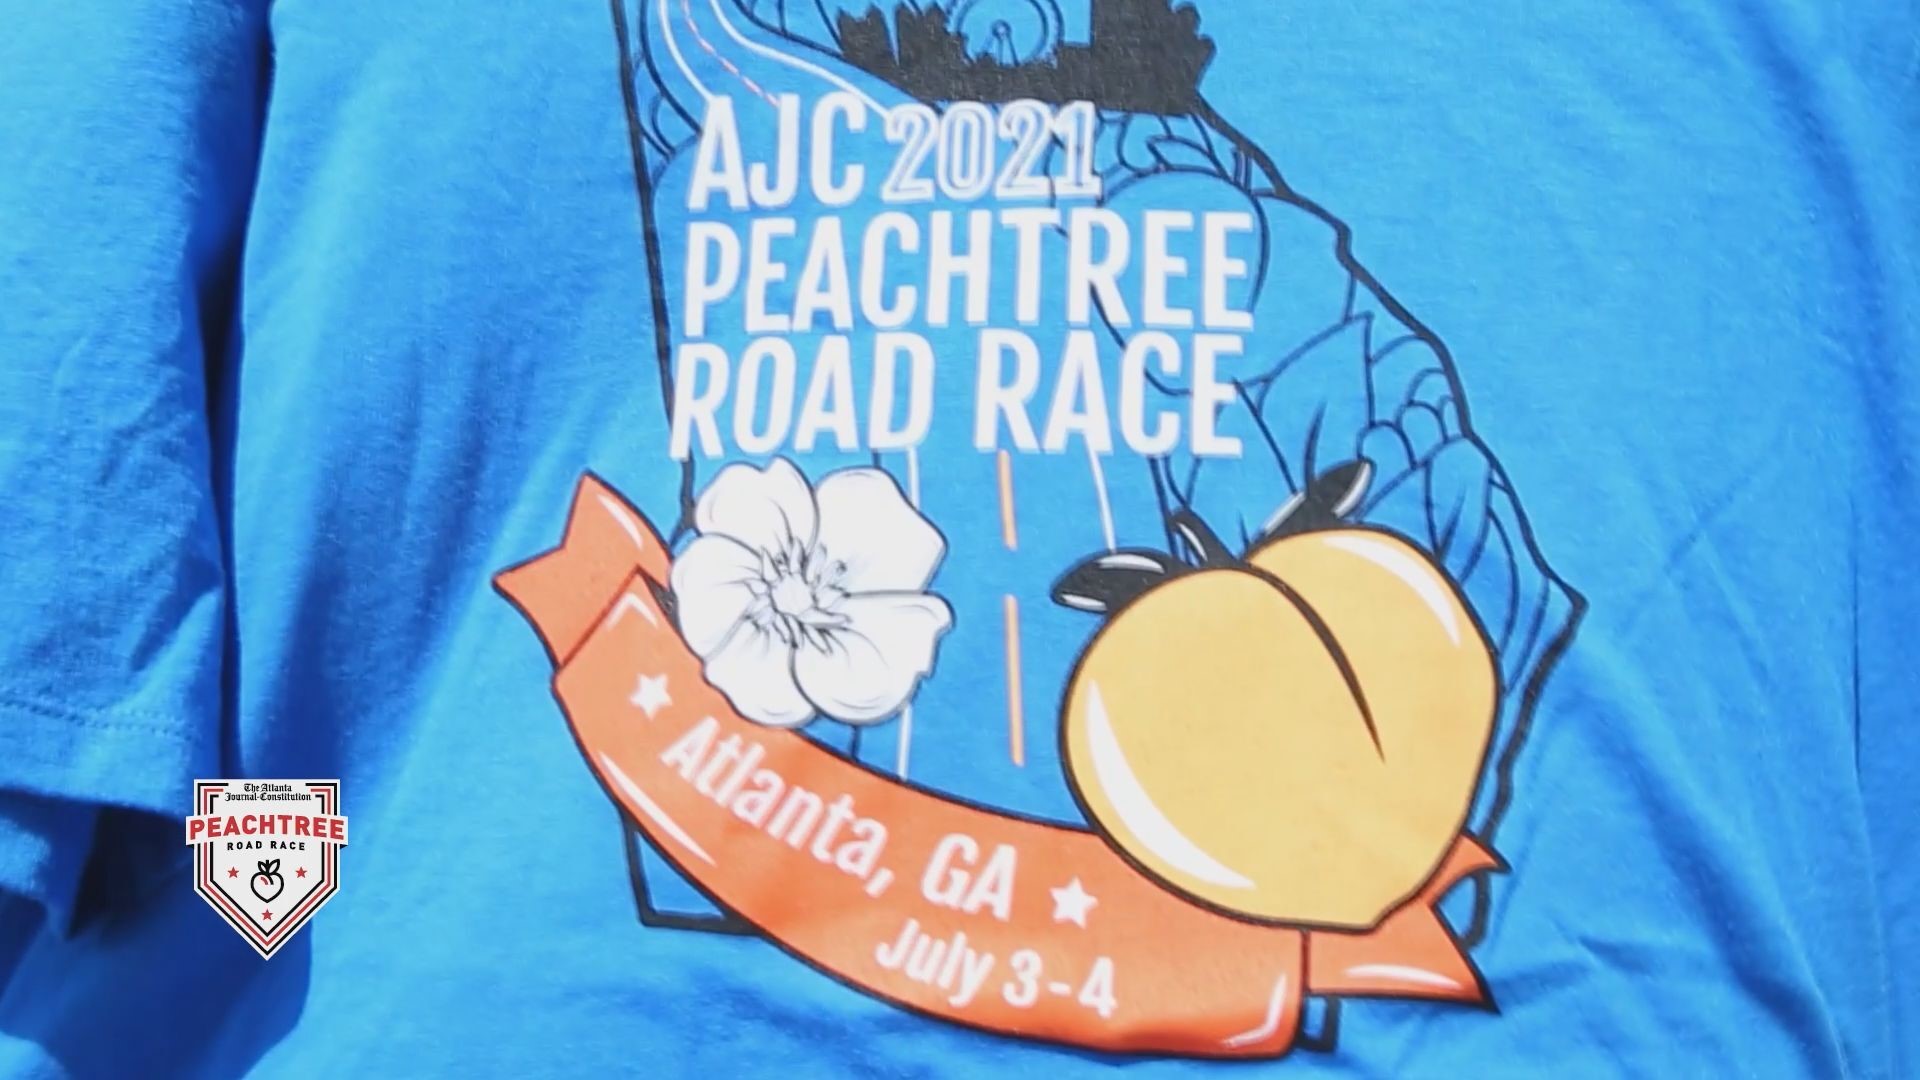 The Atlanta Track Club released this video revealing the design for 2021. This year, participants will get the shirt ahead of time.